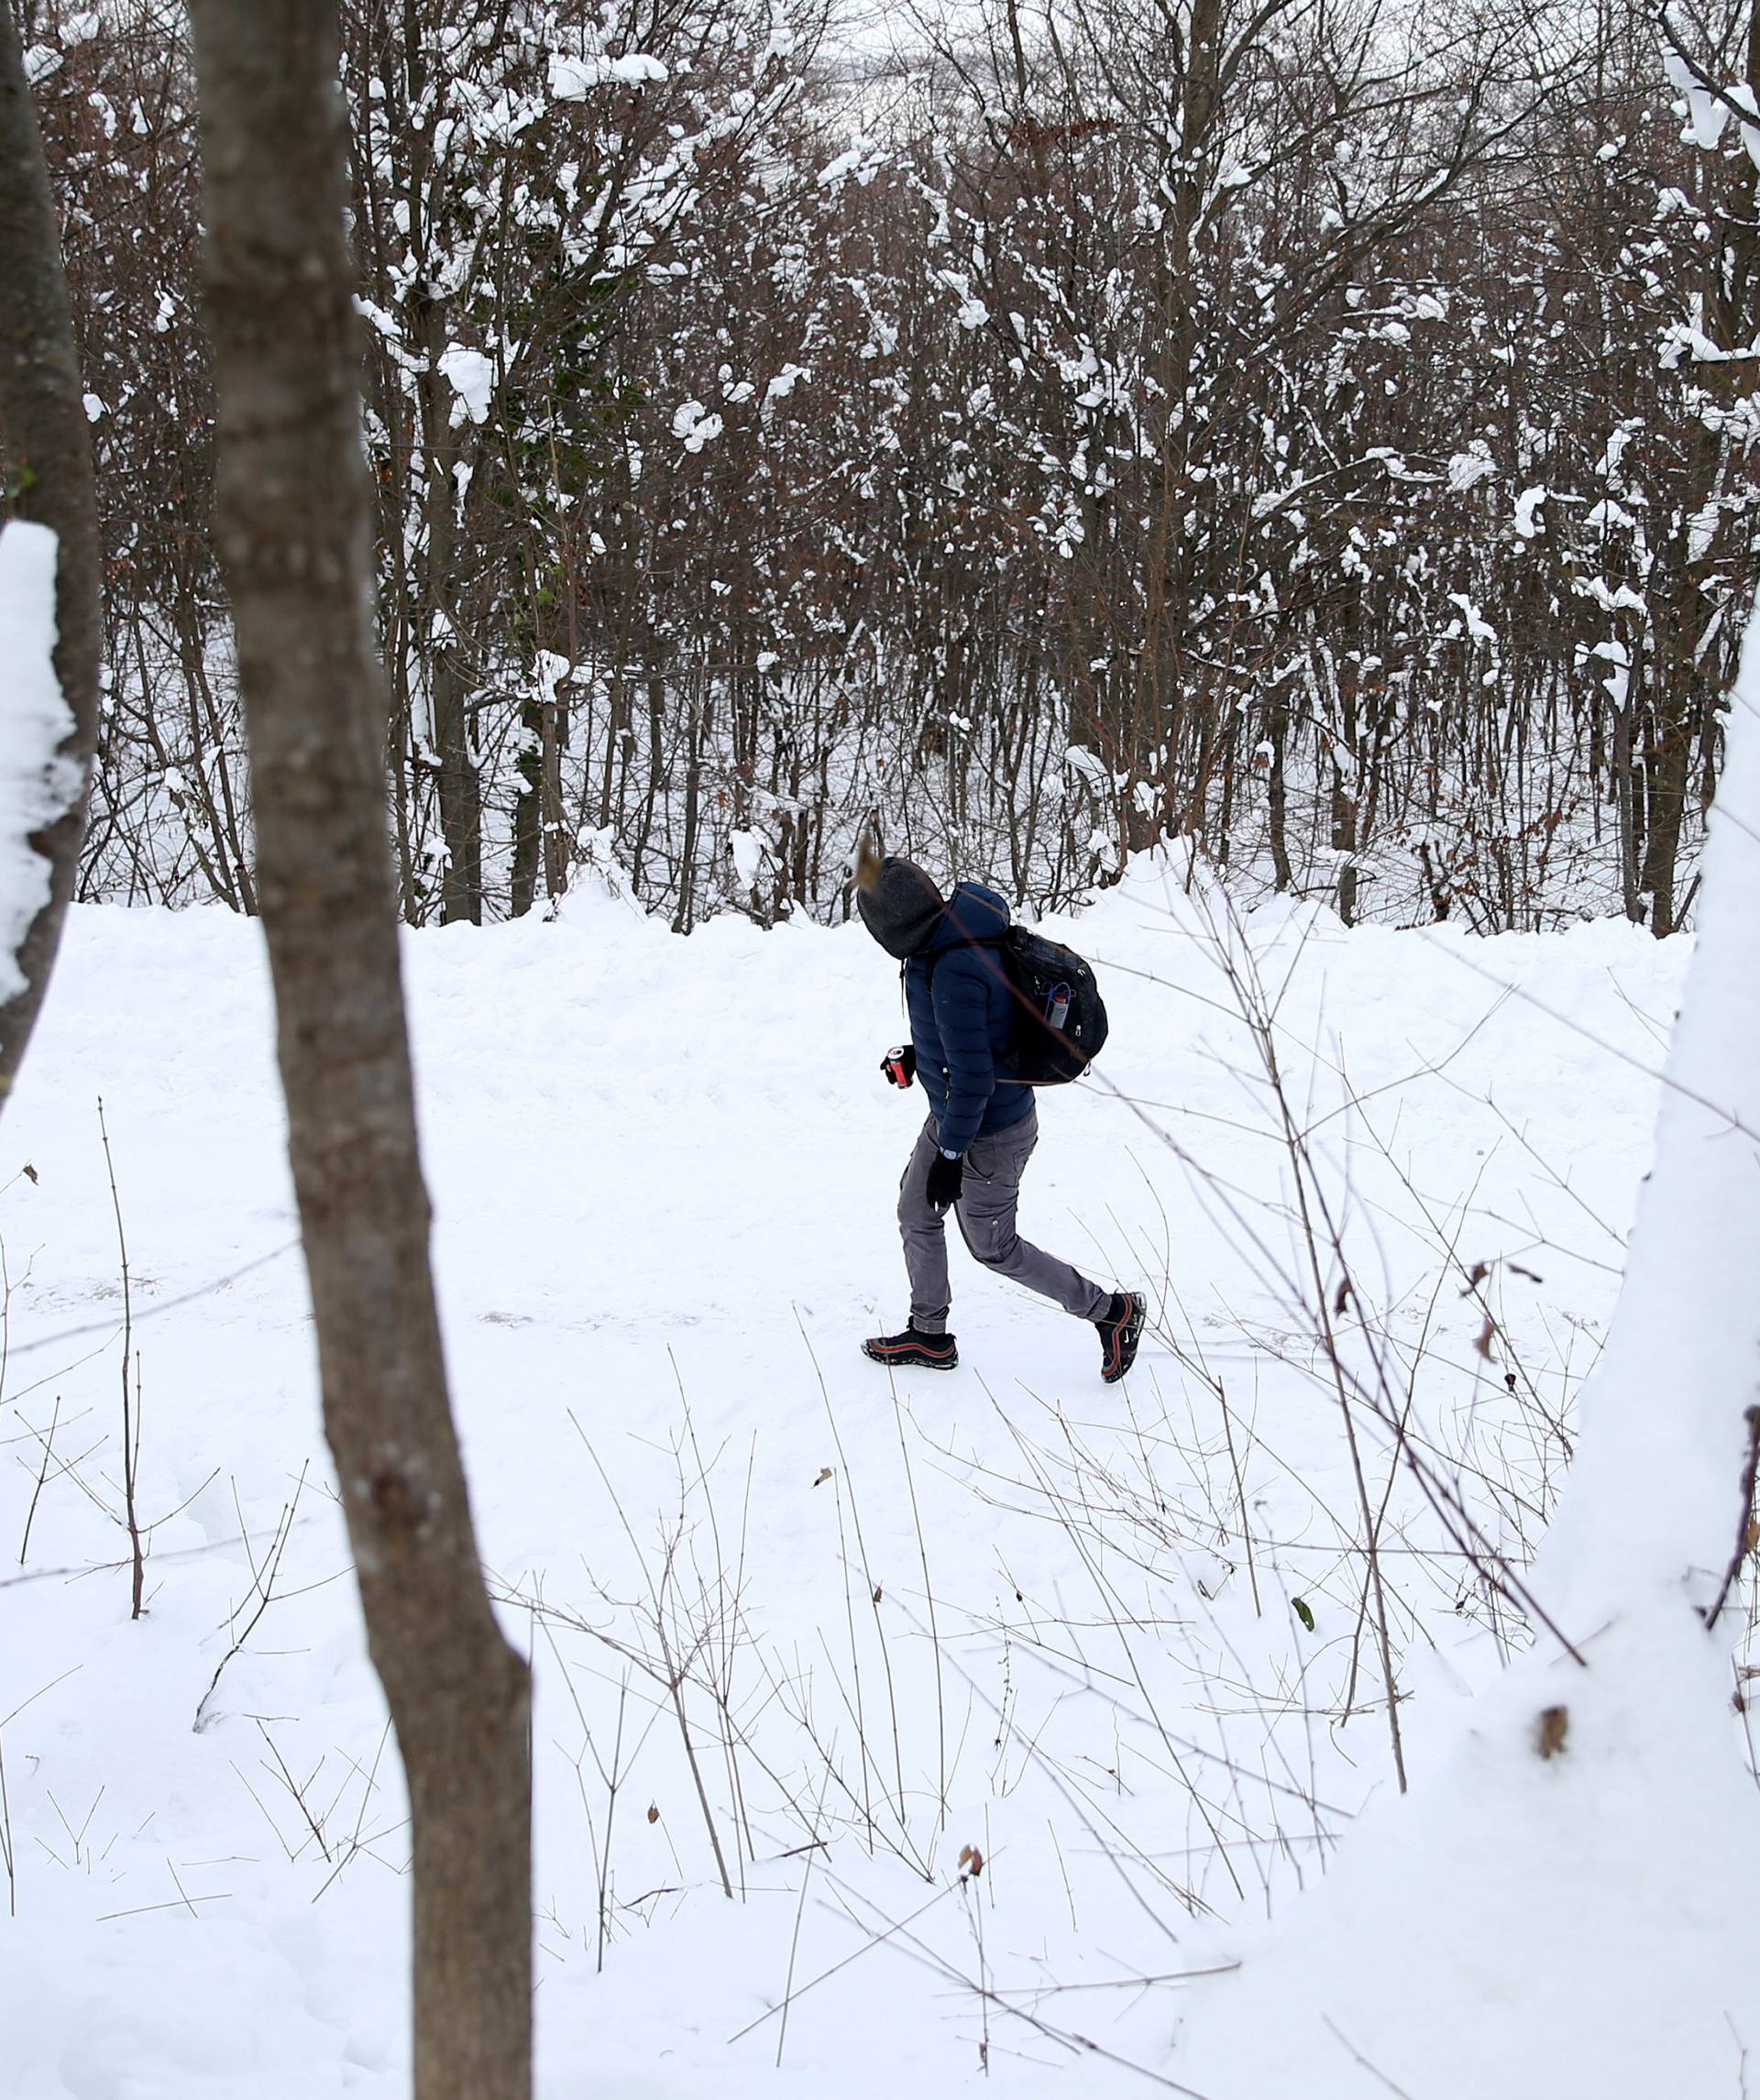 A migrant attempts to illegally cross the border into Croatia on the Pljesevica Mountain near Bihac